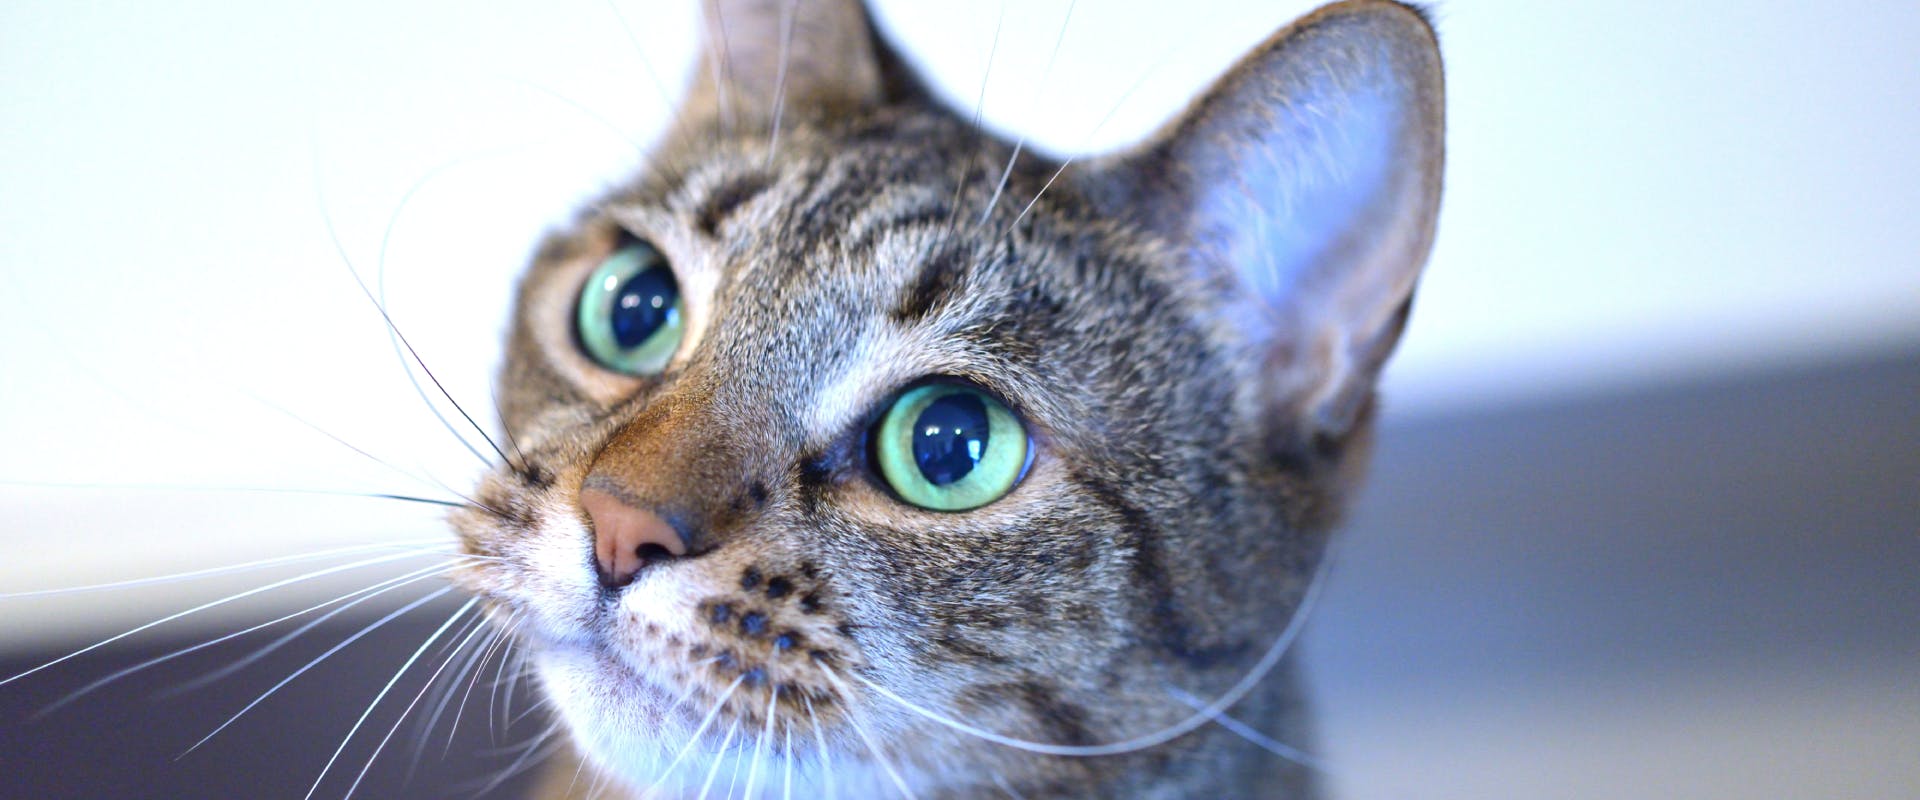 A tabby cat with dilated pupils.